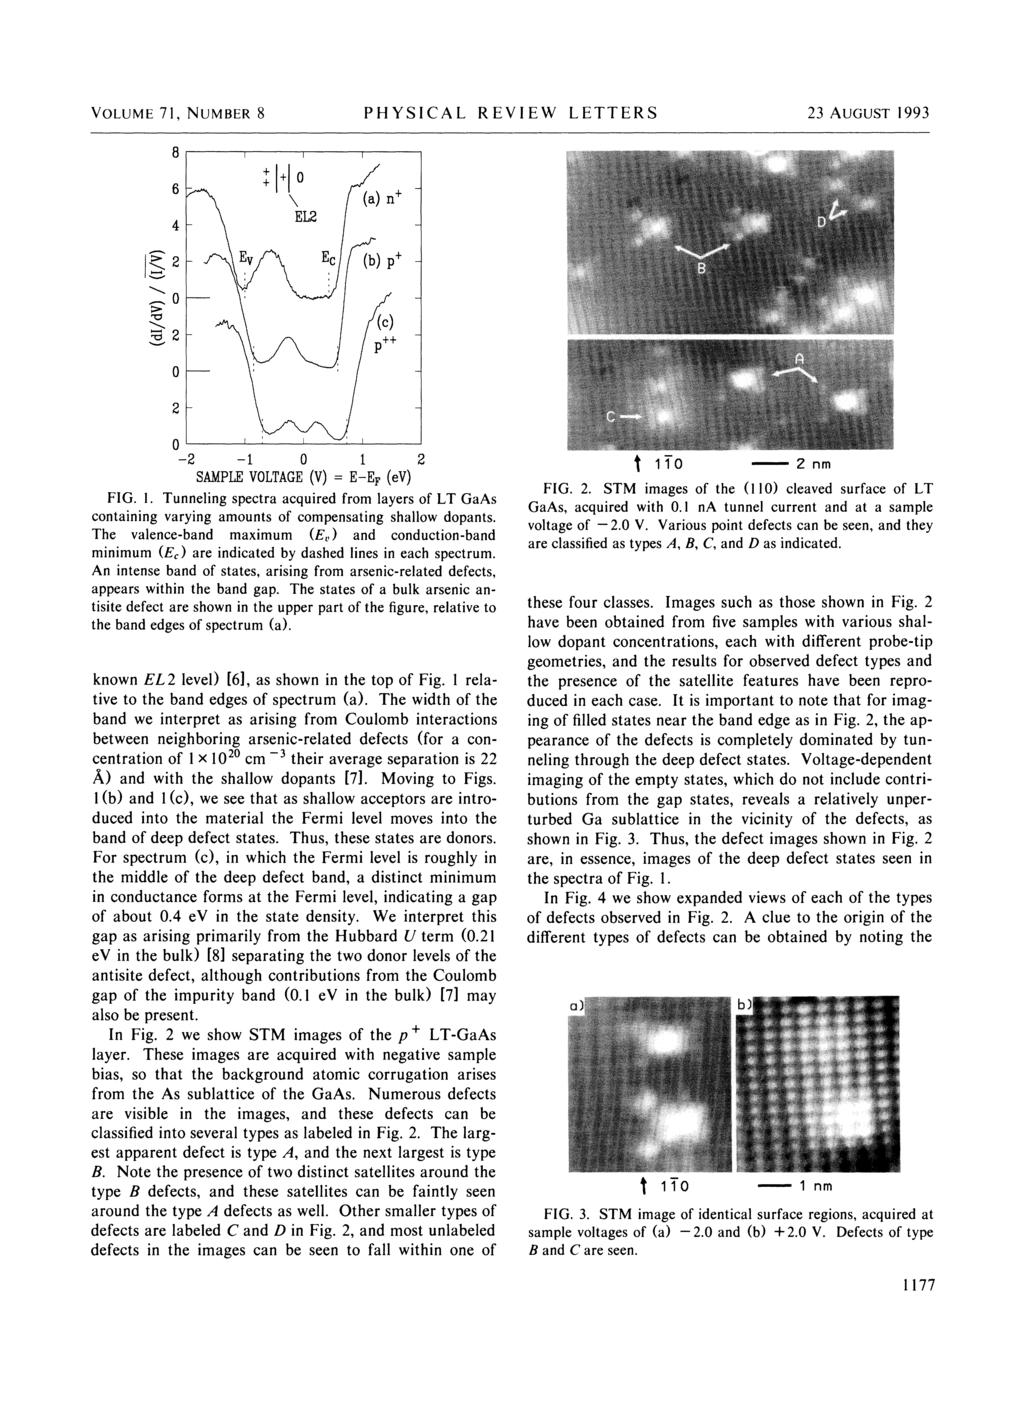 VOLUME 71, NUMBER 8 PHYSiCAL REVIEW LETTERS 23 AUGUST 1993 2 0 M2 0 2 1 0 1 2 SAMPLE VOLTAGE (V) = E E& (ev) FIG. 1. Tunneling spectra acquired from layers of LT GaAs containing varying amounts of compensating shallow dopants.